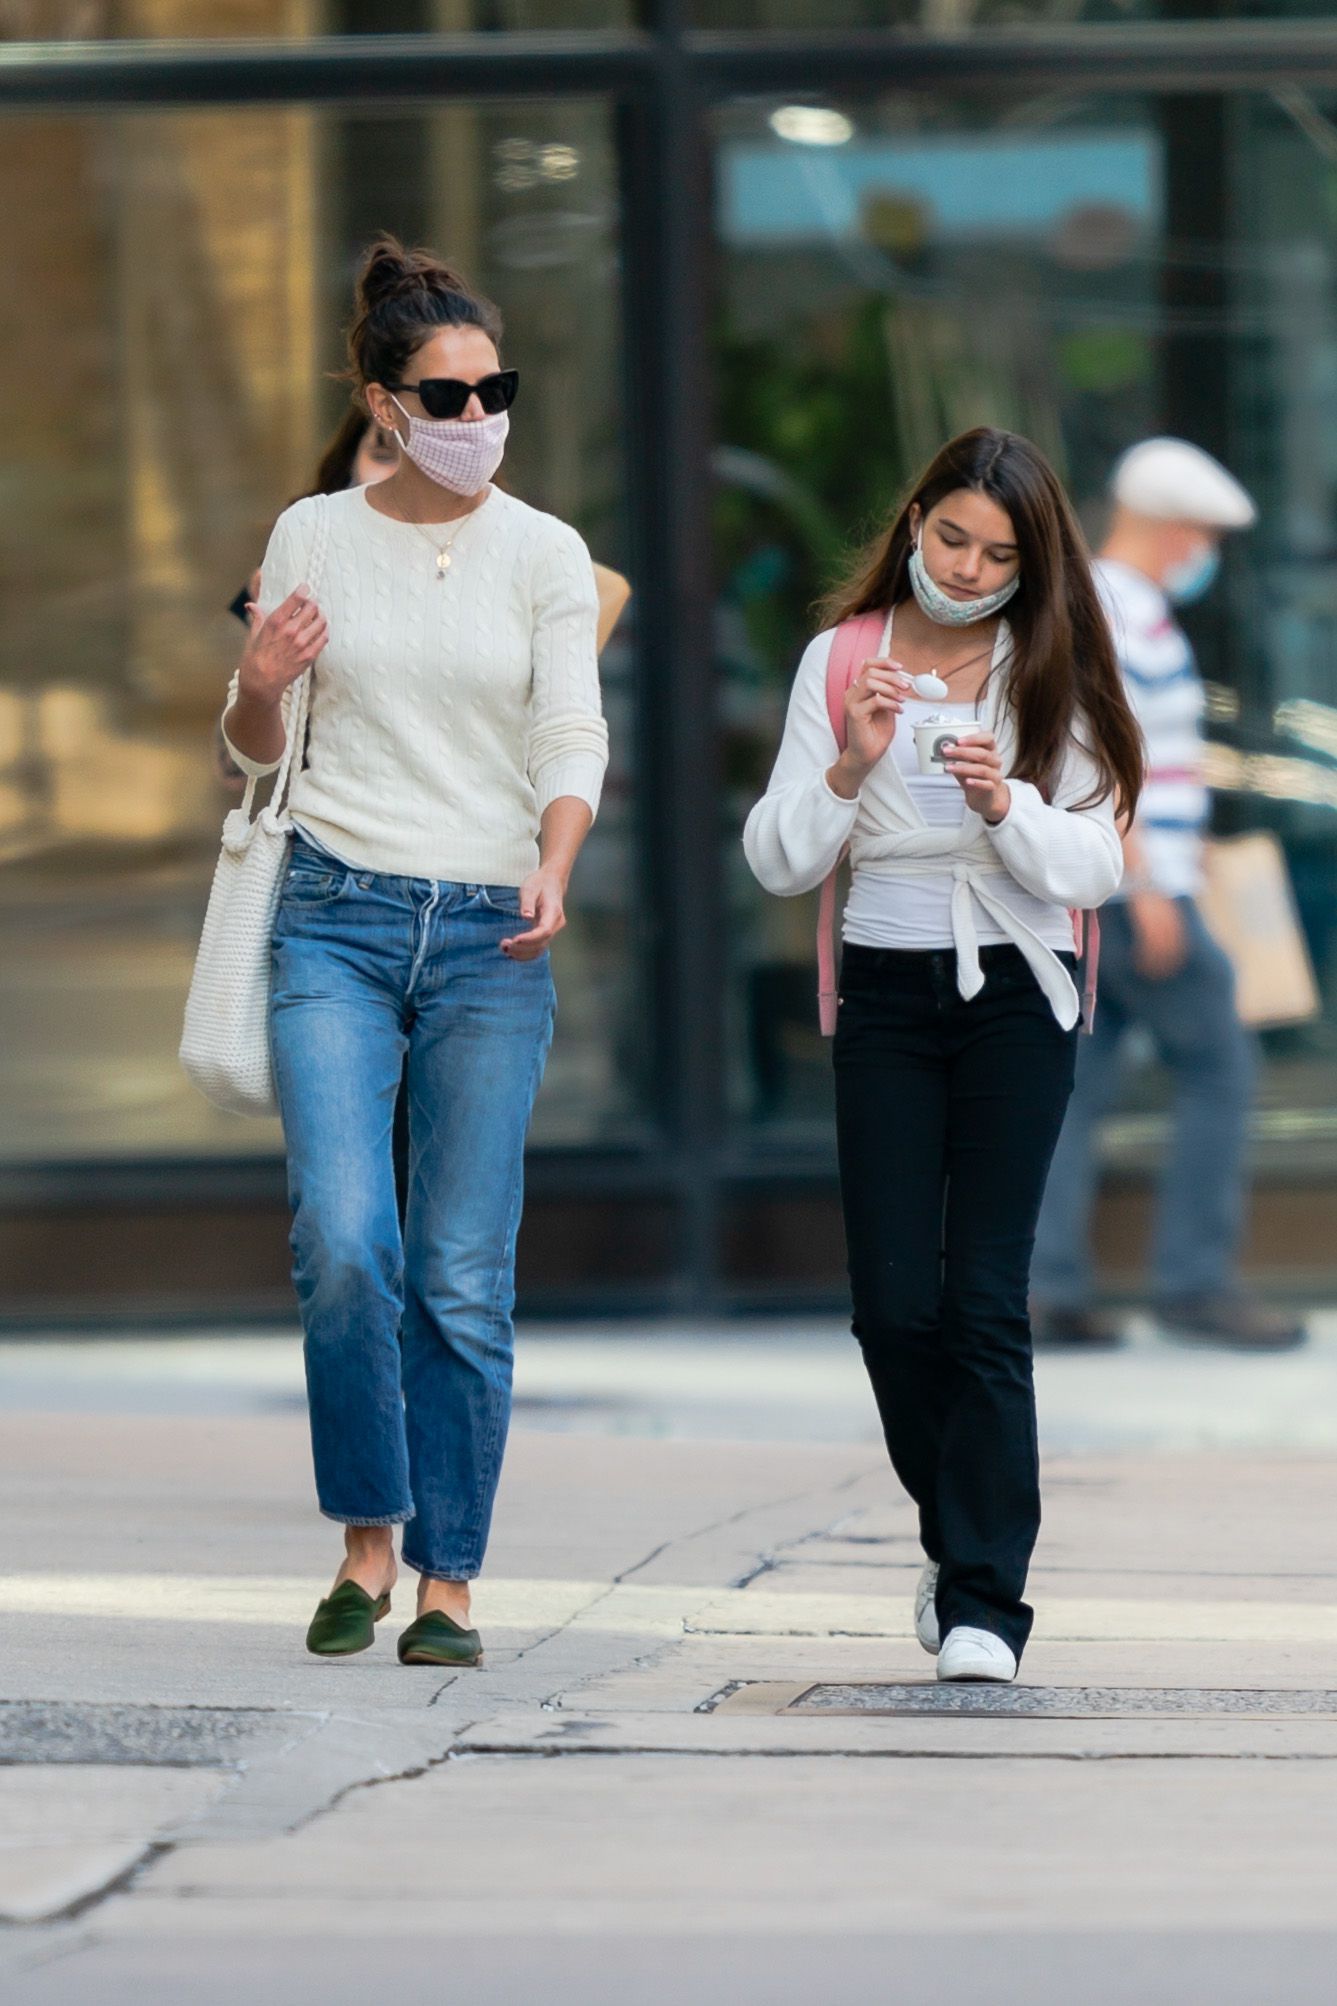 Katie Holmes and Suri Cruise are seen on September 08, 2020 in New York City. | Source: Getty Images